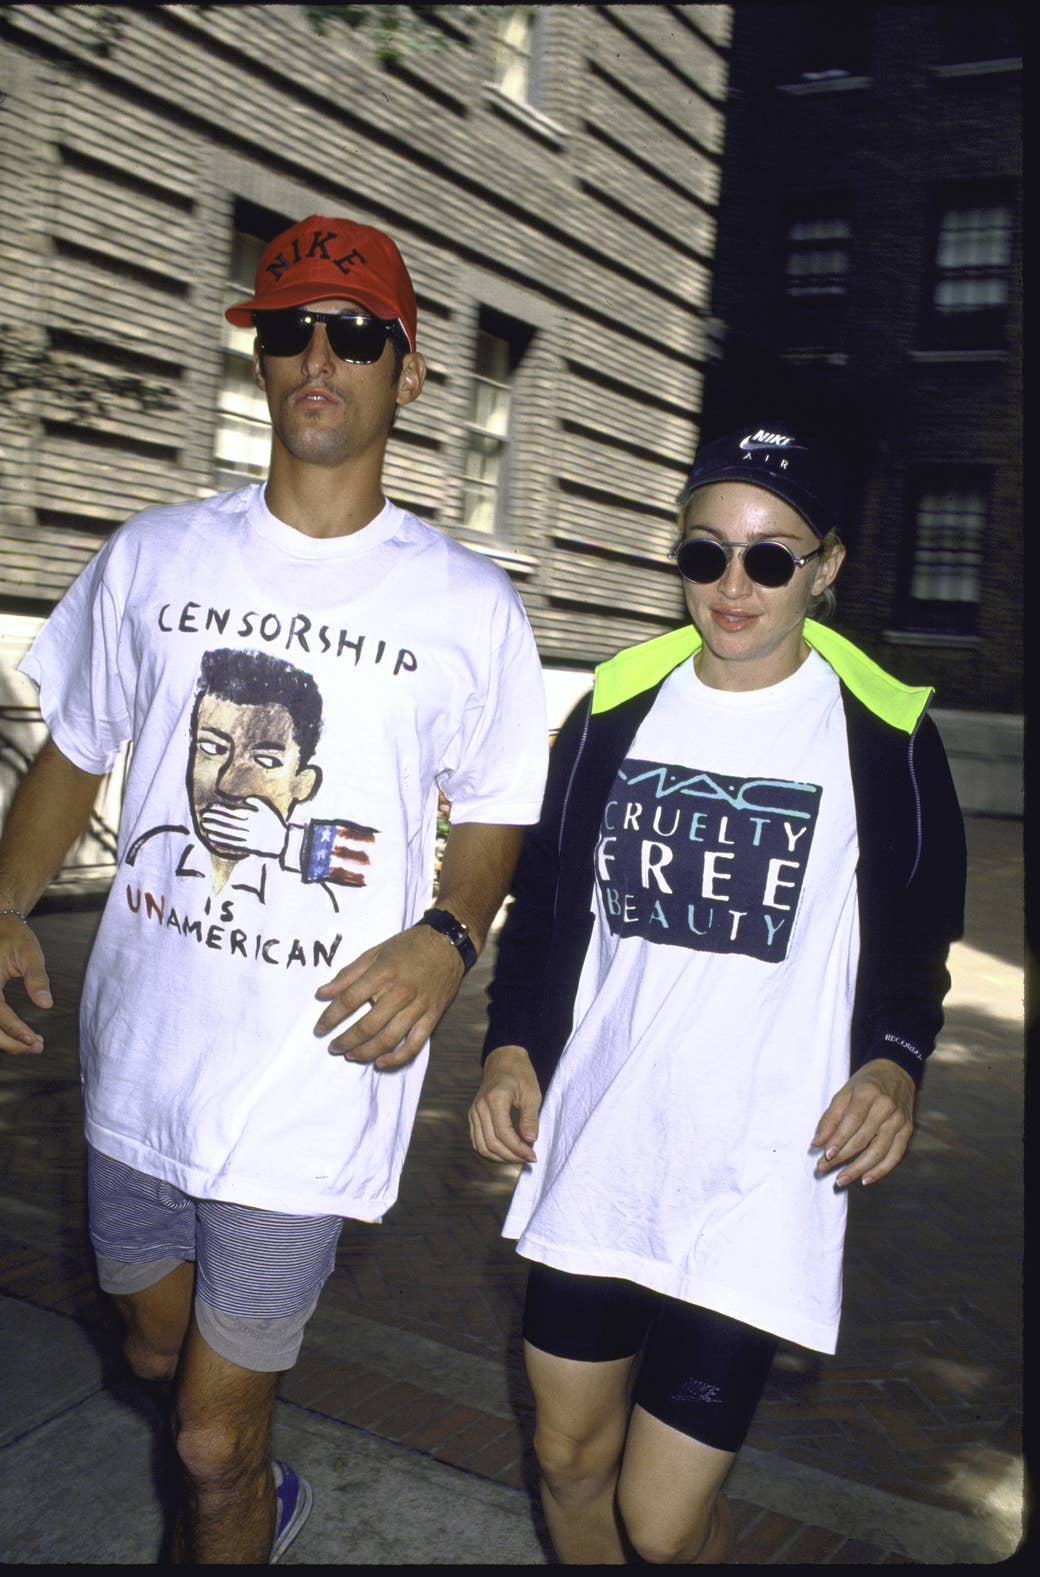 Madonna and a friend in t-shirts with activist slogans on them 